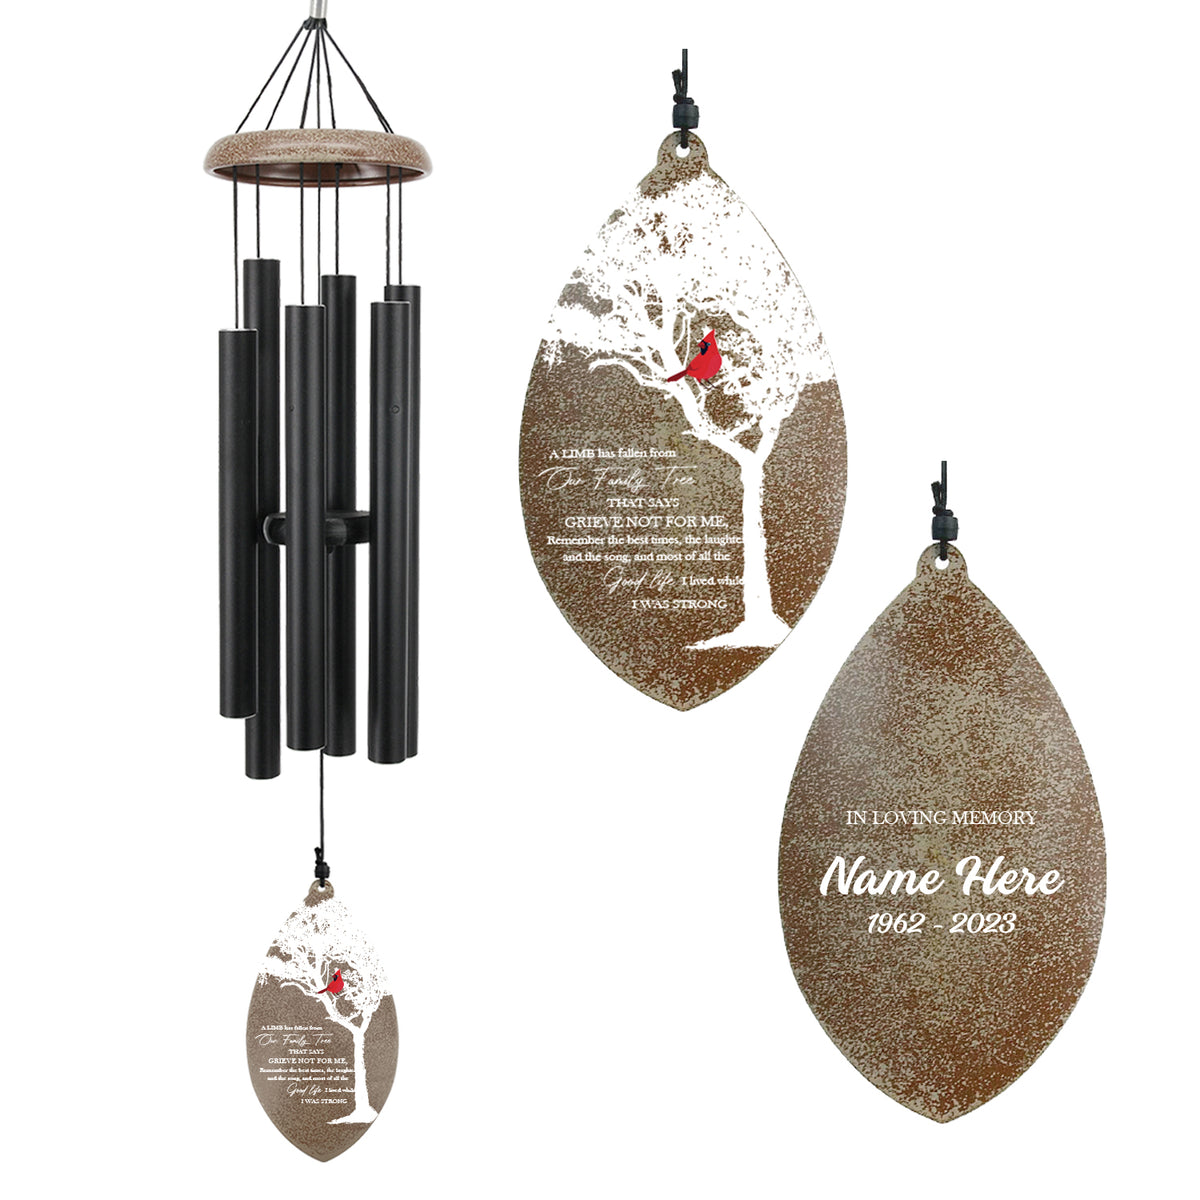 ASTARIN Personalized Wind Chimes Outdoor Deep Tone, 35'' Customized Memorial WindChimes for Loss of Loved One, Melody Wind Chime Unique as Sympathy Gift